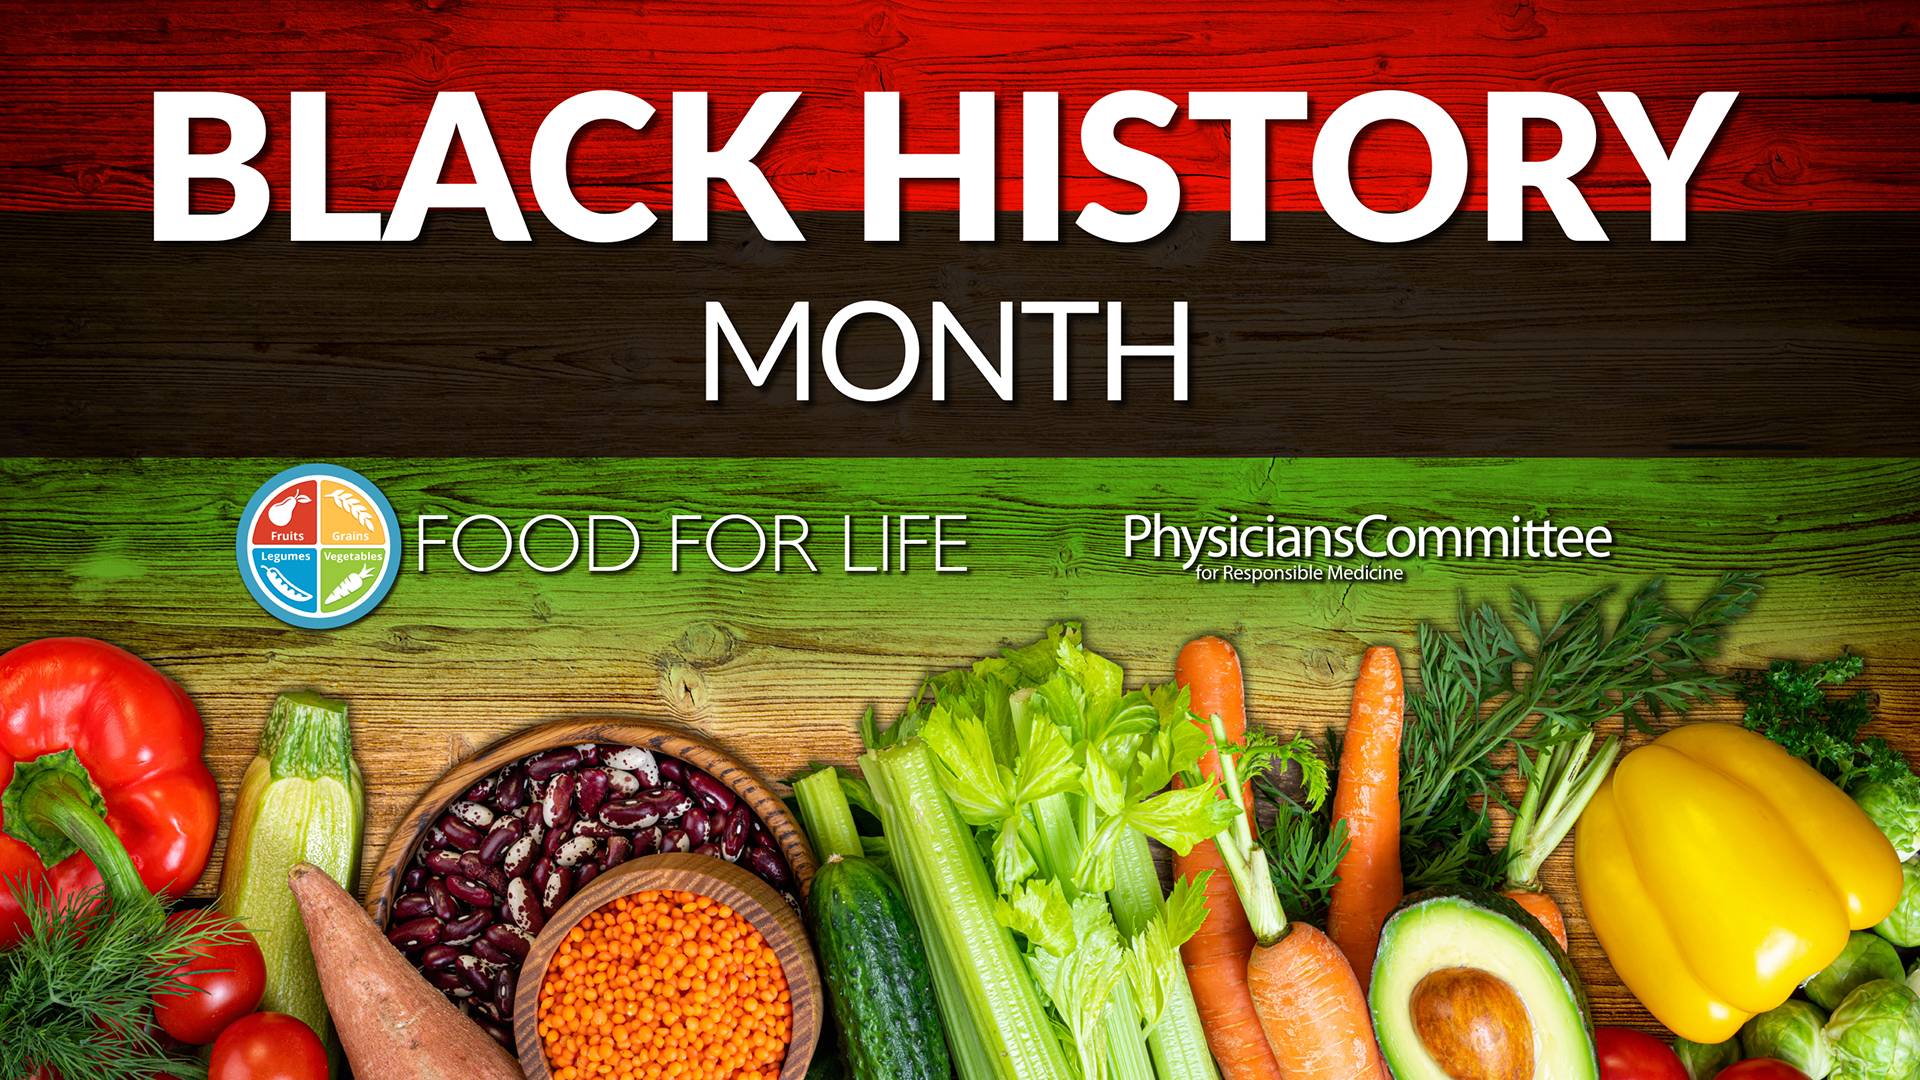 Celebrate Black History Month With Food for Life Plant-Based Cooking Classes